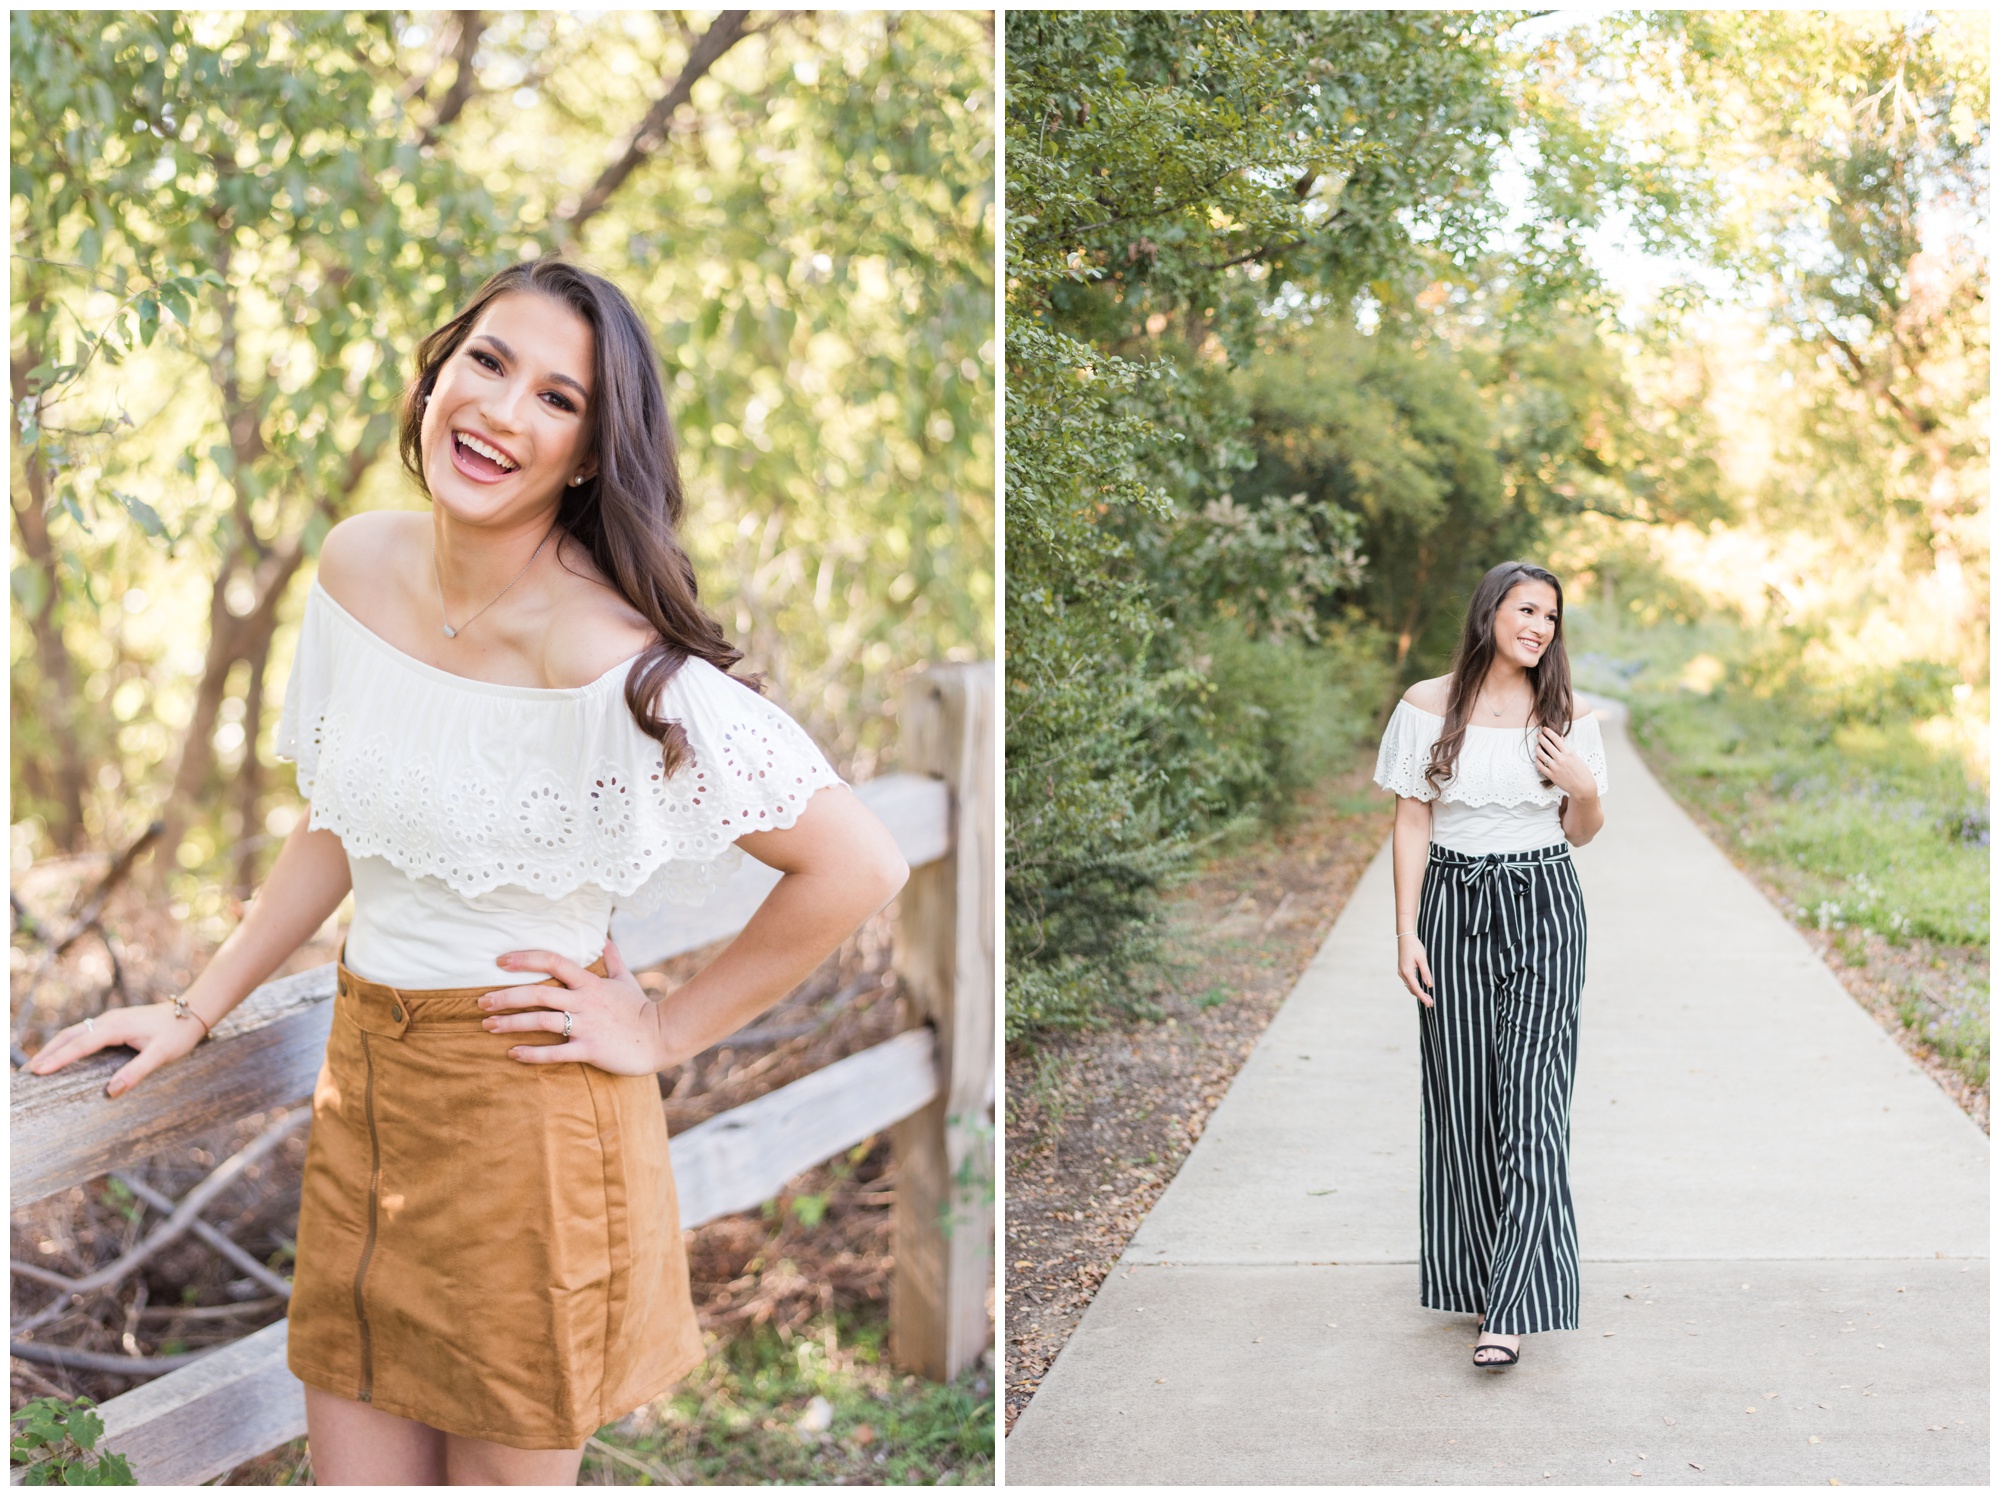 Fort Worth Senior Photographer | Fort Worth Stockyards | Fort Worth Airfield Falls and Conservation Park | Lauren Grimes Photography | Nazarene Christian Academy